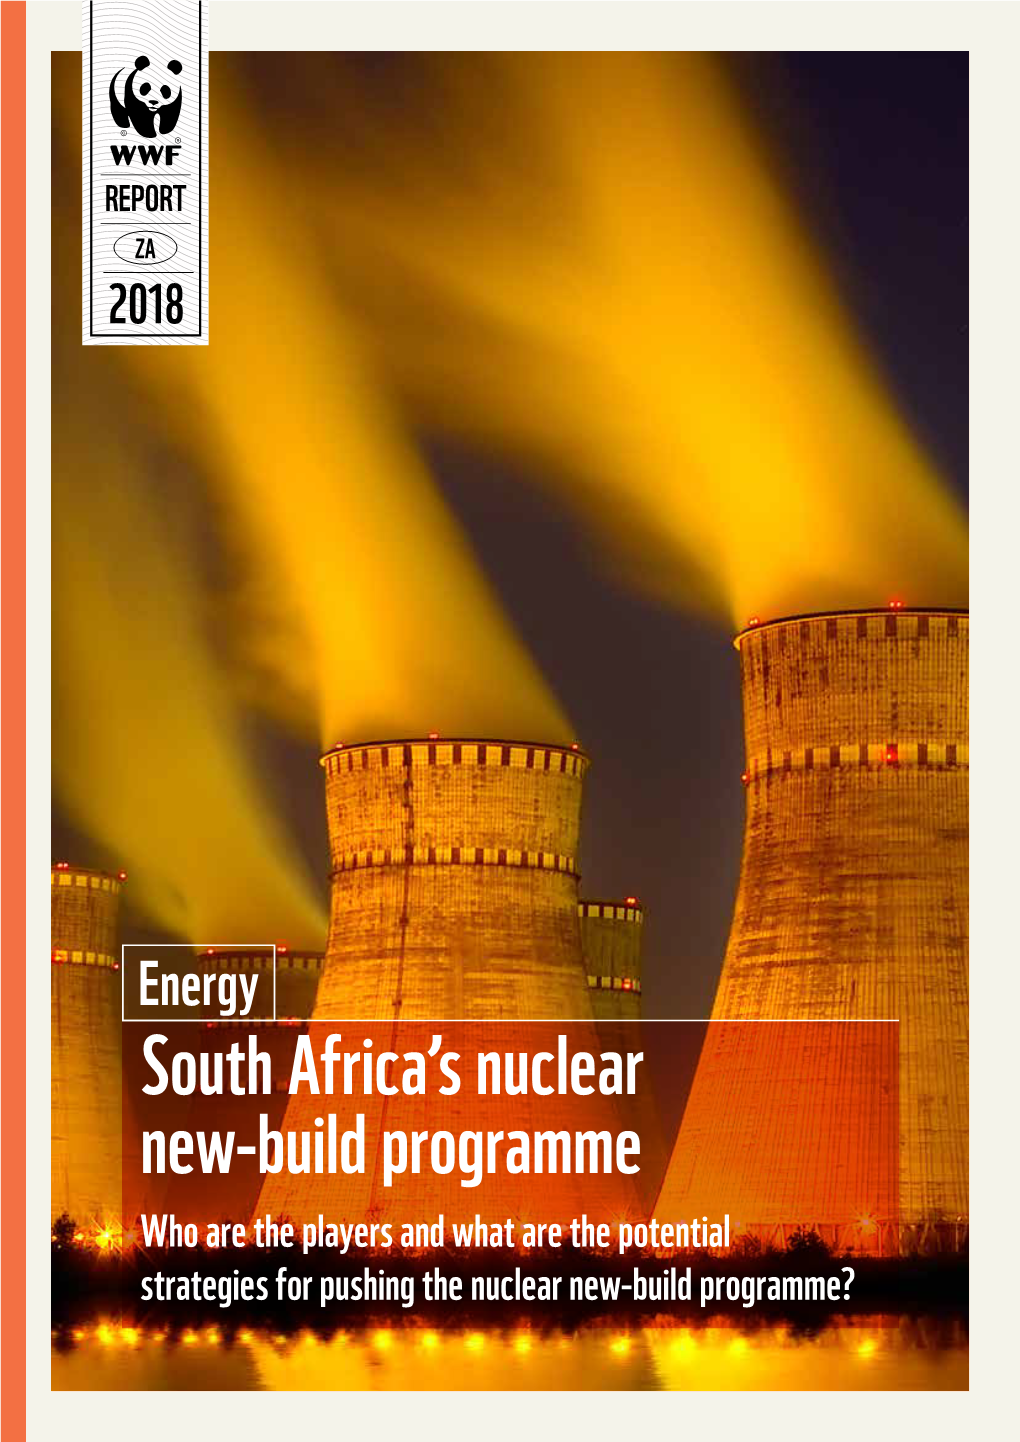 South Africa's Nuclear New-Build Programme: Who Are the Players and What Are the Potential Strategies